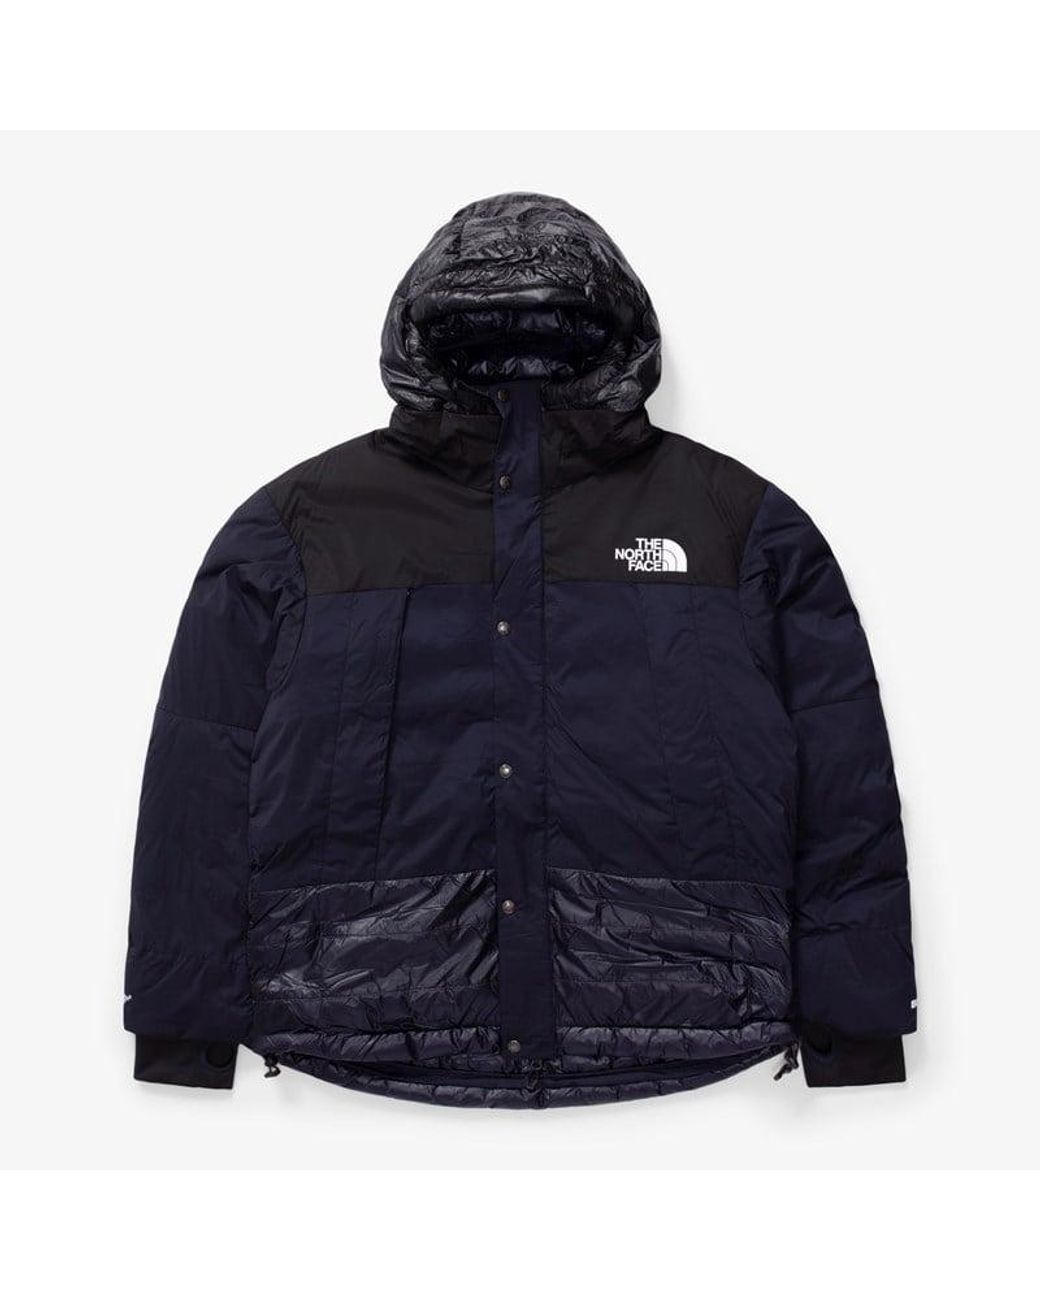 The North Face 50/50 Mountain Jacket X Undercover in Blue for Men